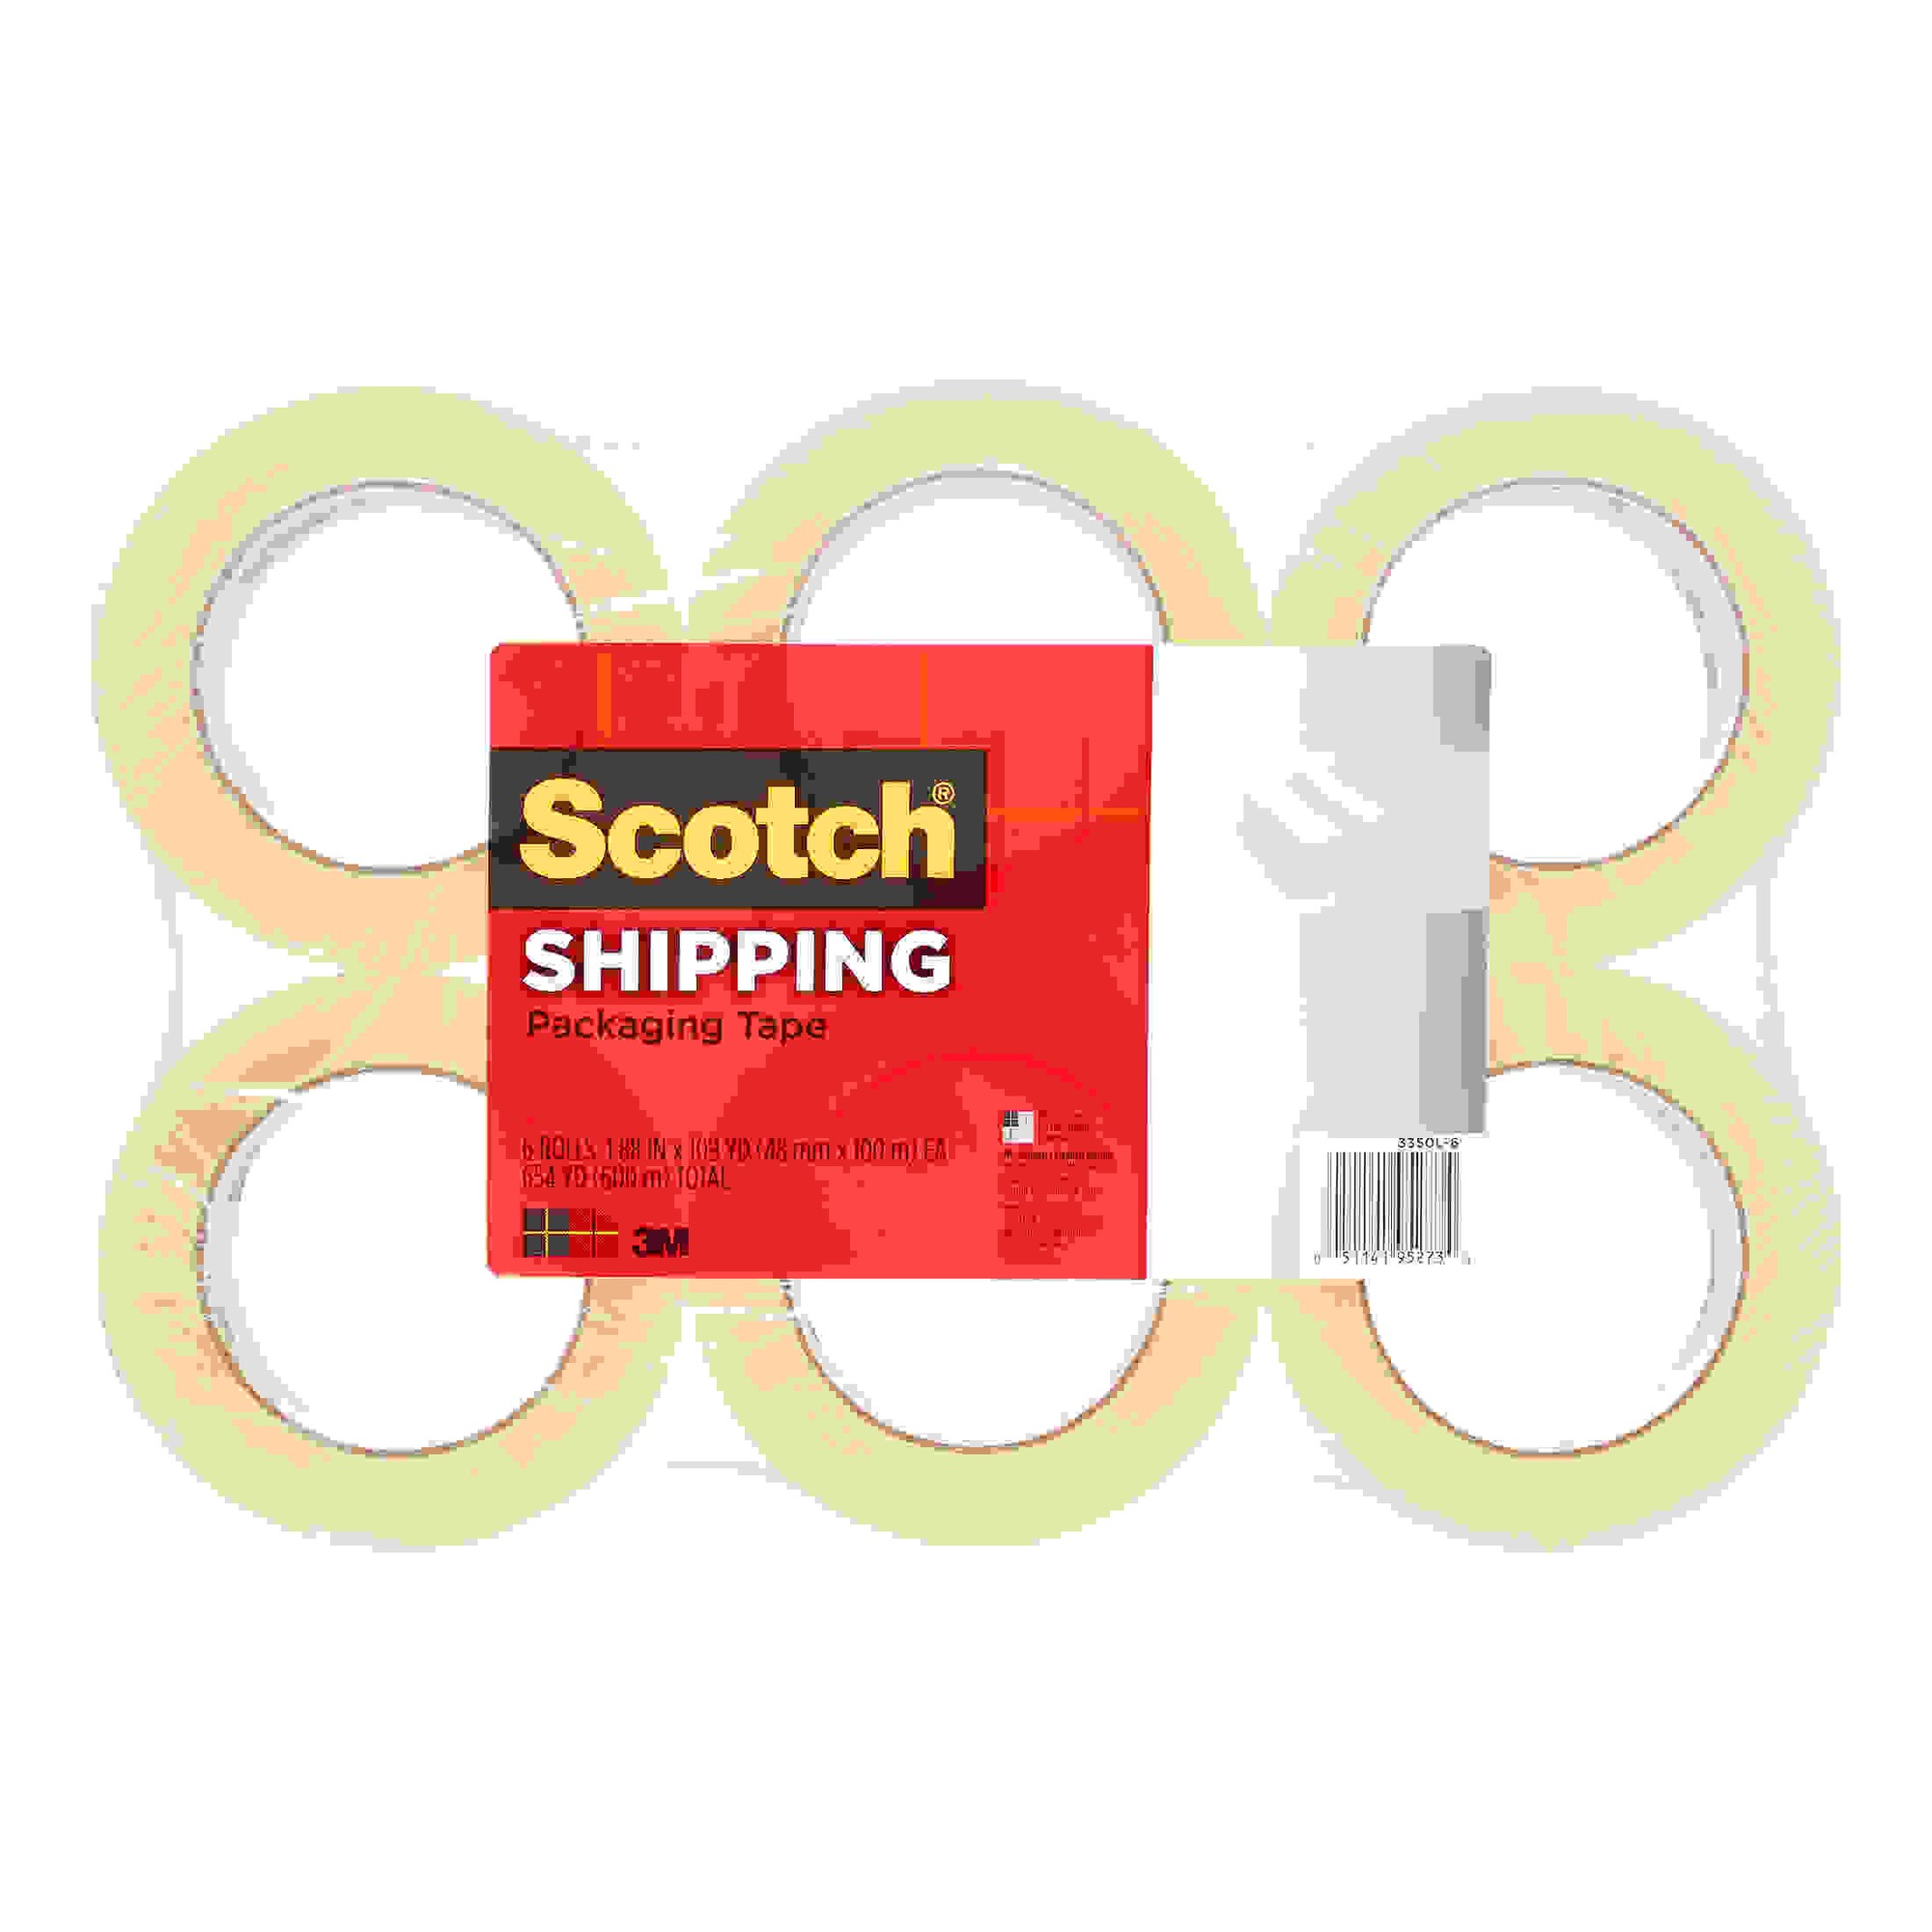 Scotch Lightweight Shipping/Packaging Tape - 109 yd Length x 1.88" Width - 2.2 mil Thickness - 3" Core - Synthetic Rubber Resin 